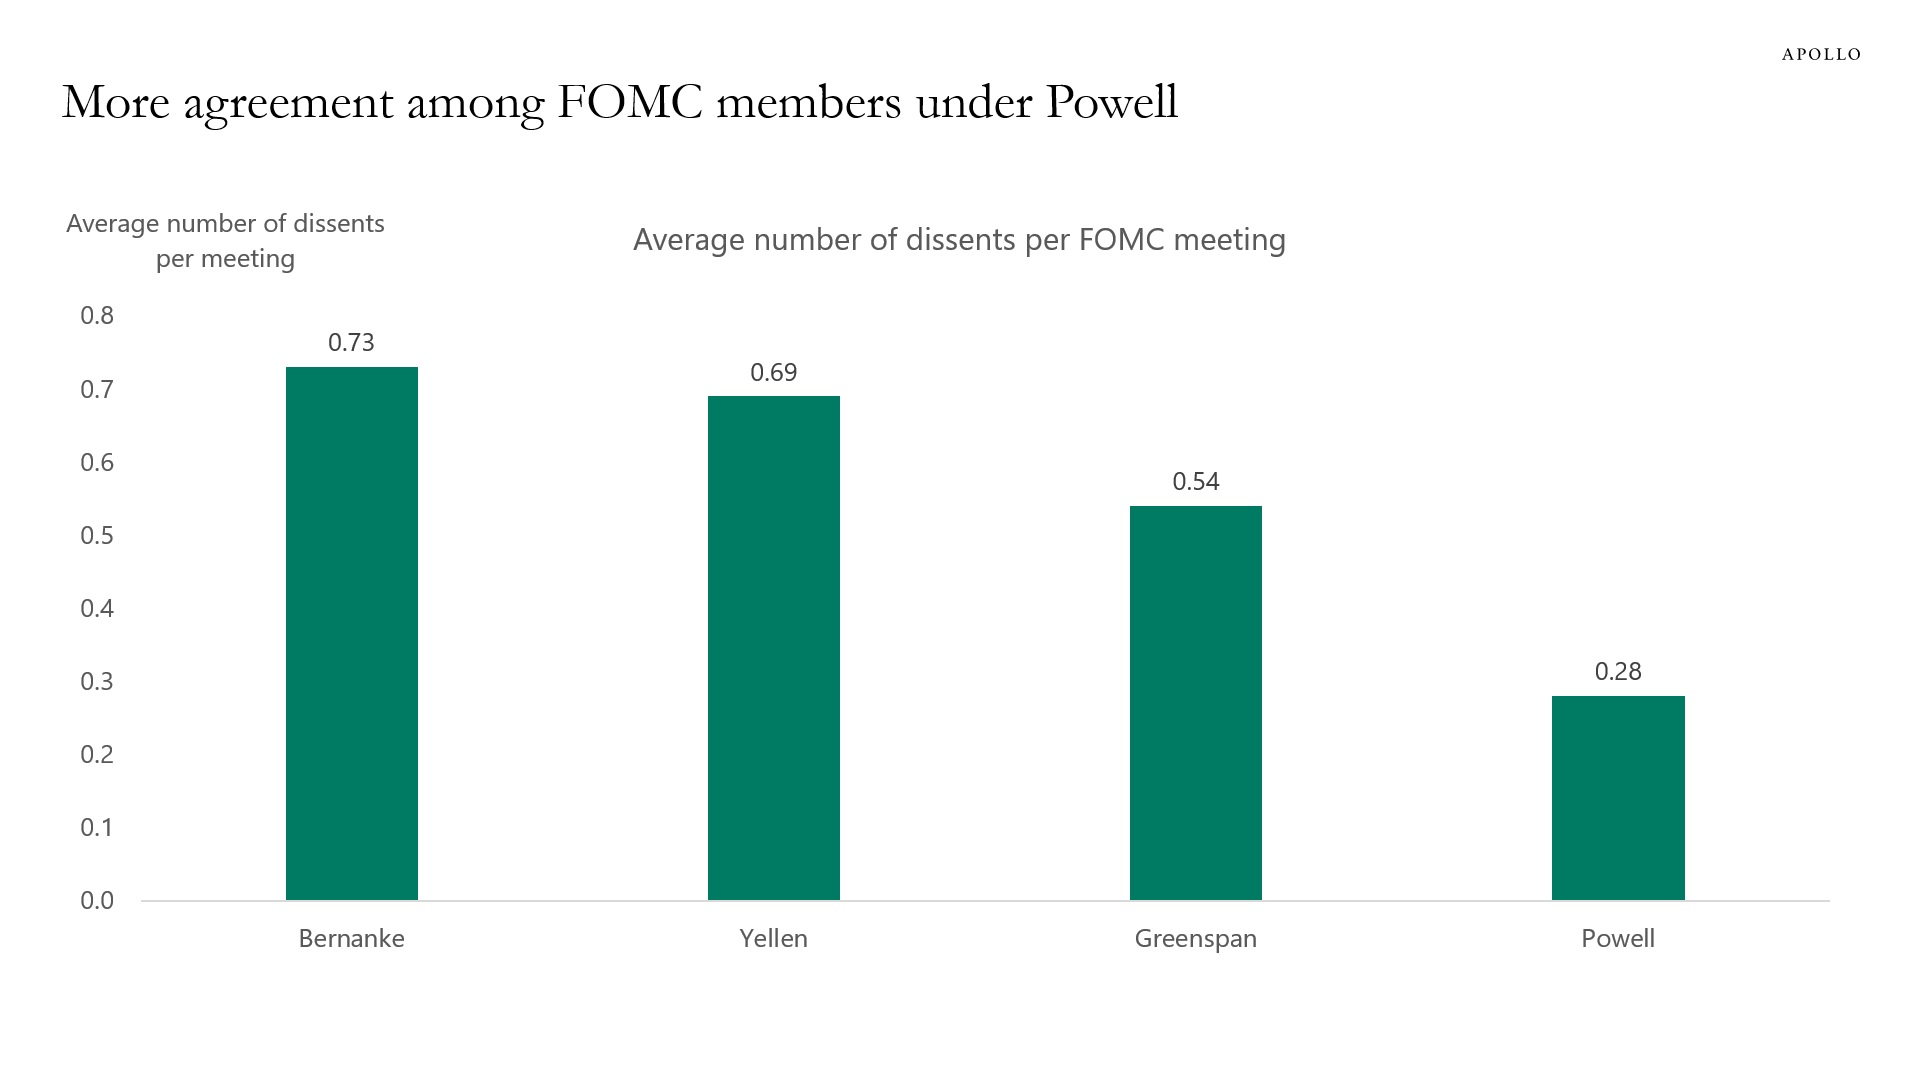 More agreement among FOMC members under Jerome Powell